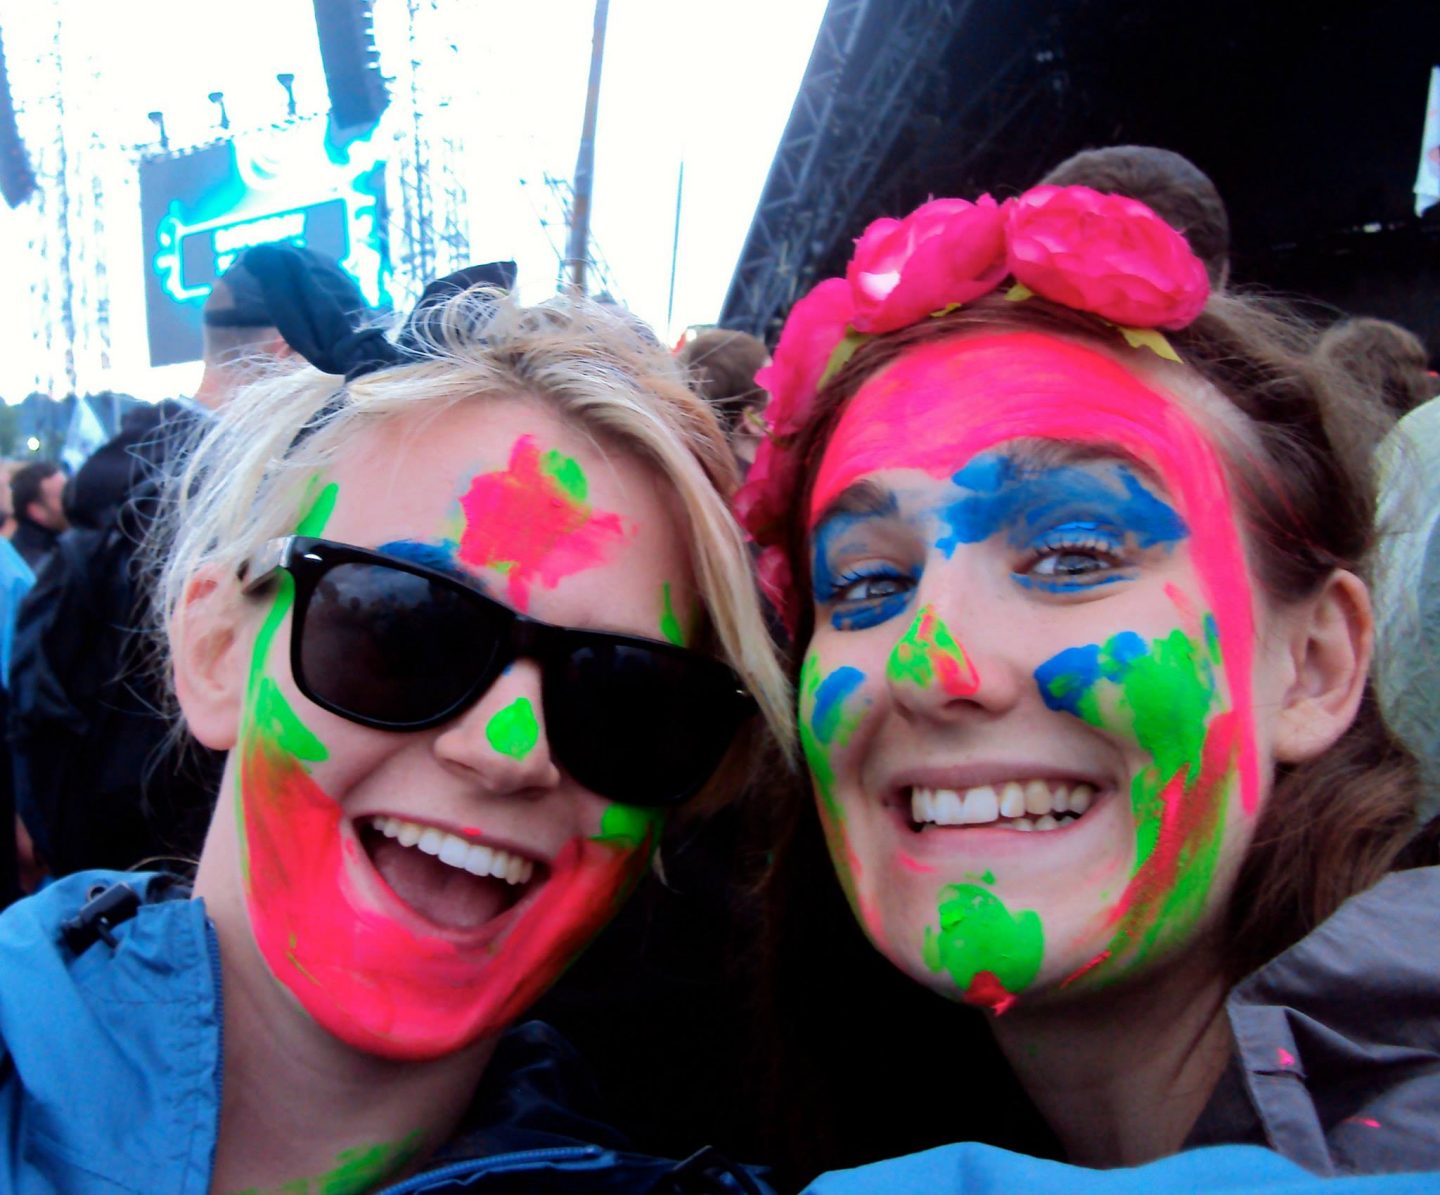 Girls with face paints in the crowd